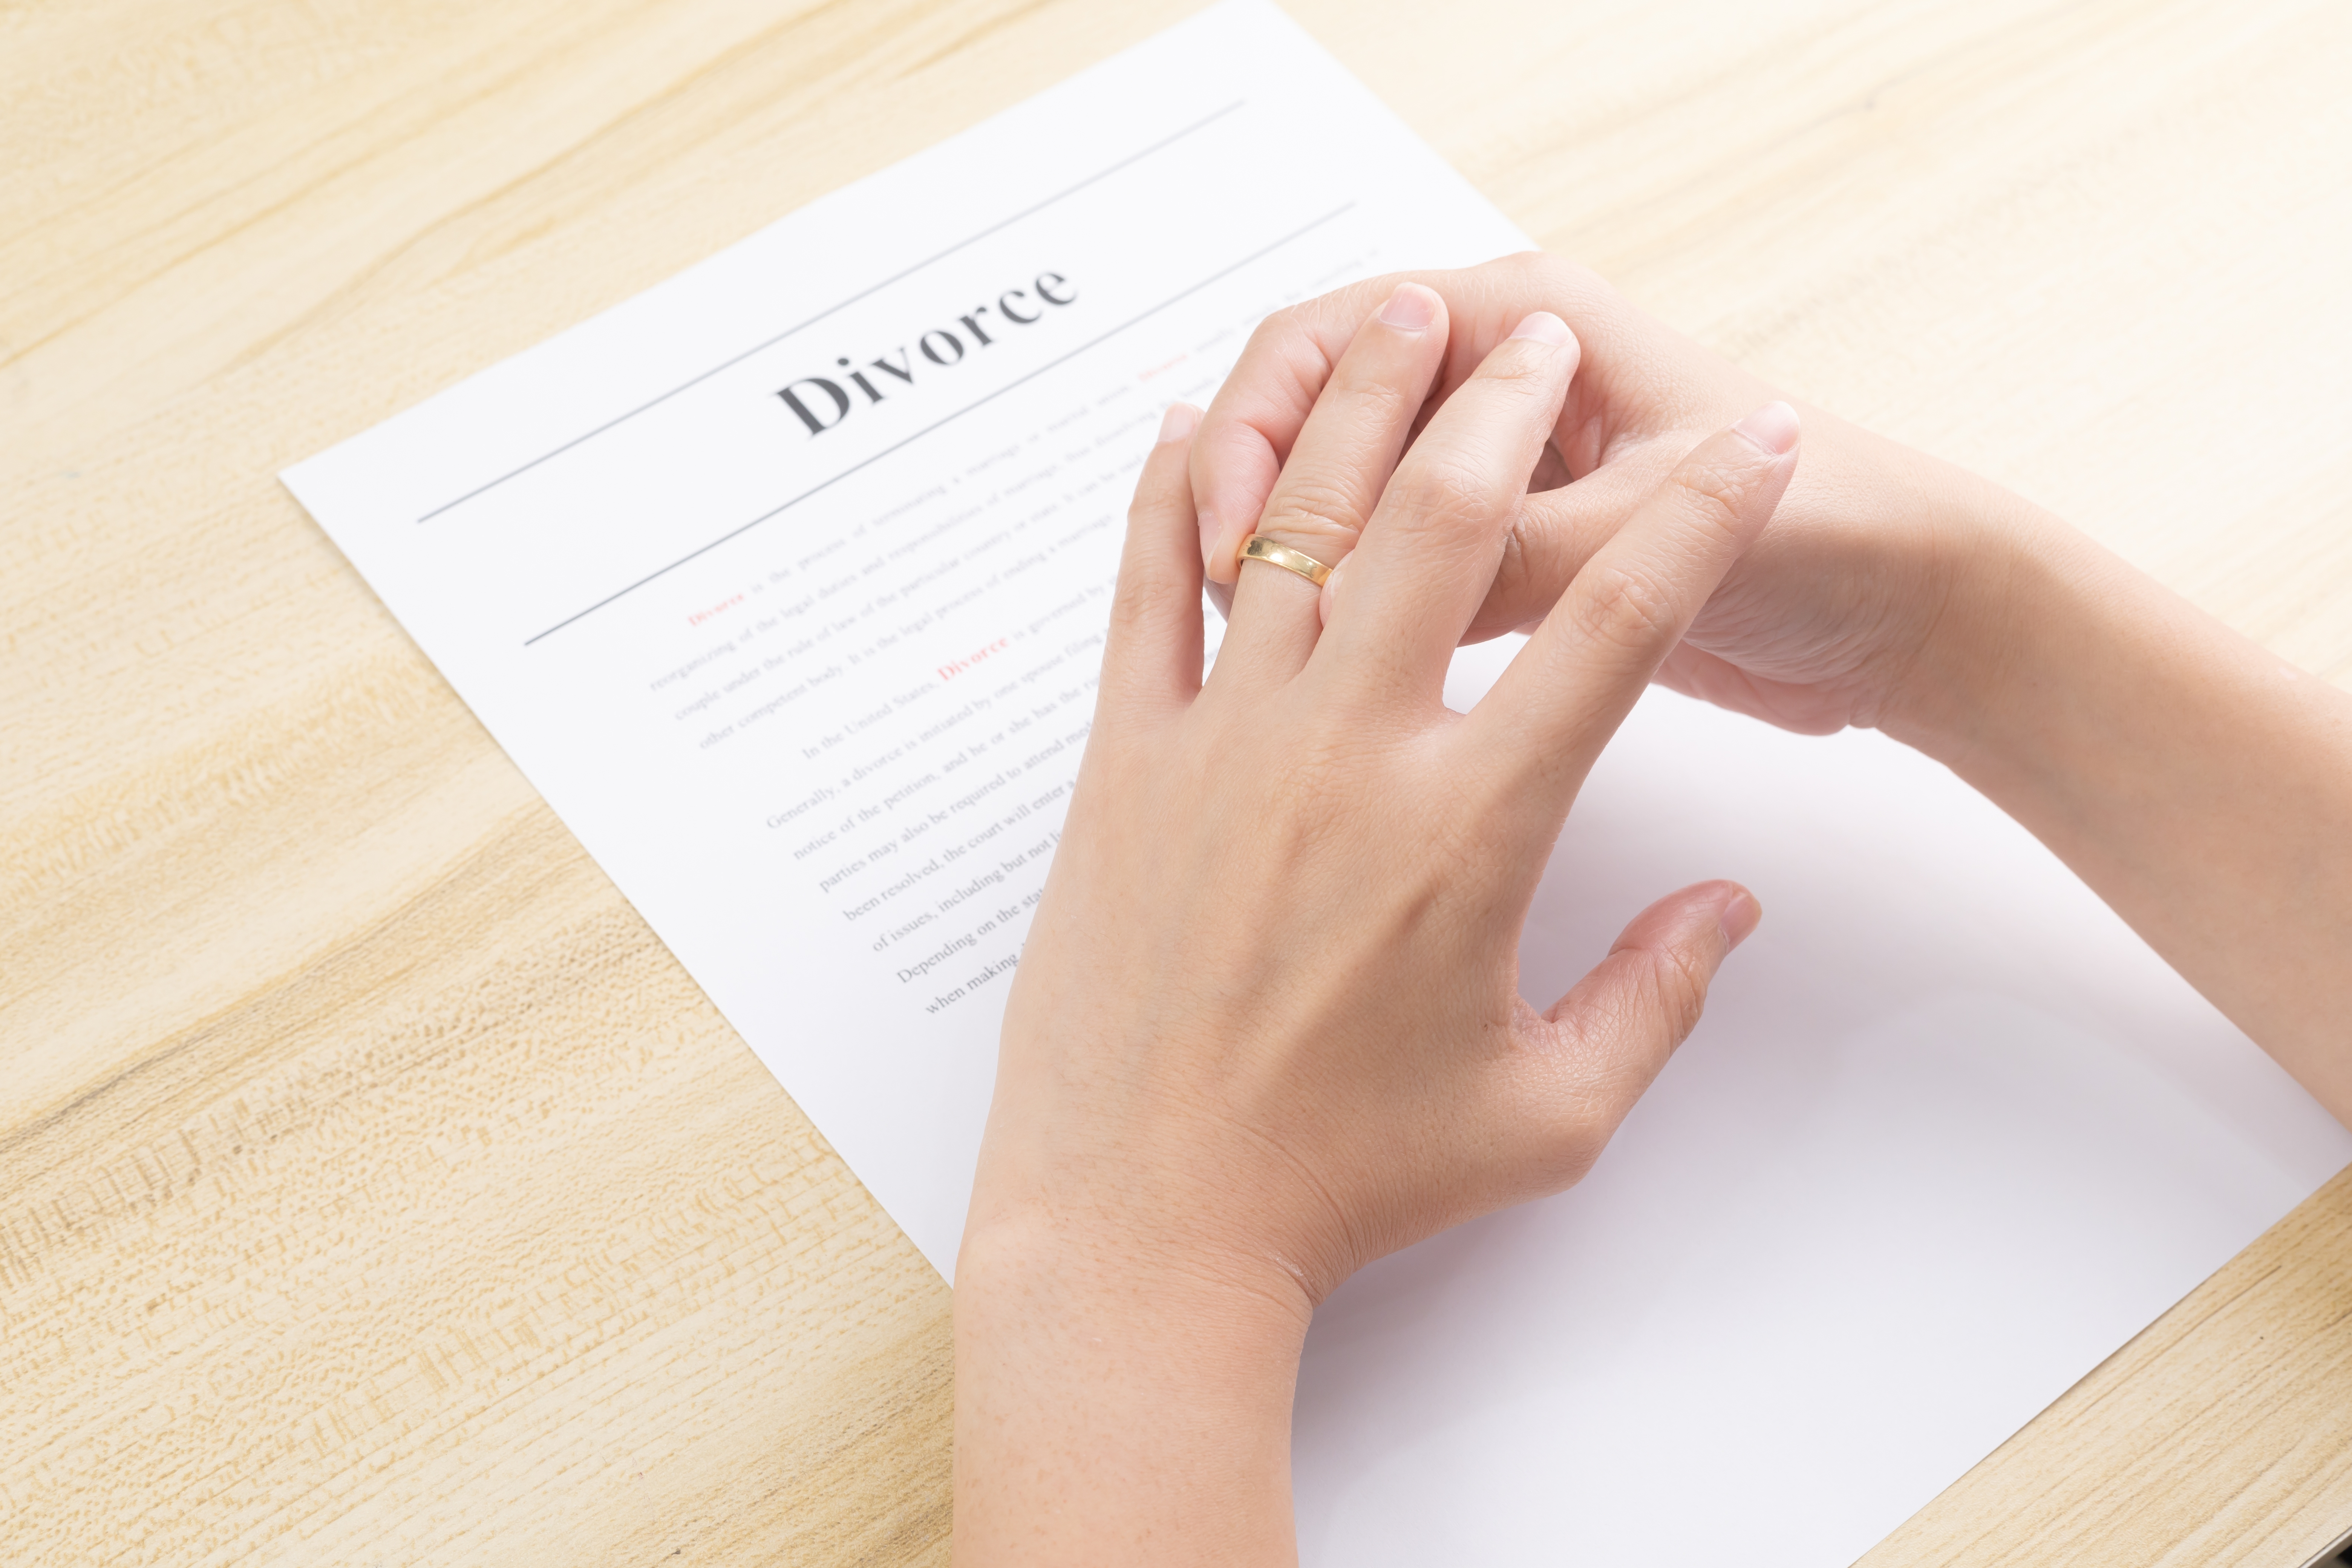 A woman's hand over divorce papers | Source: Shutterstock